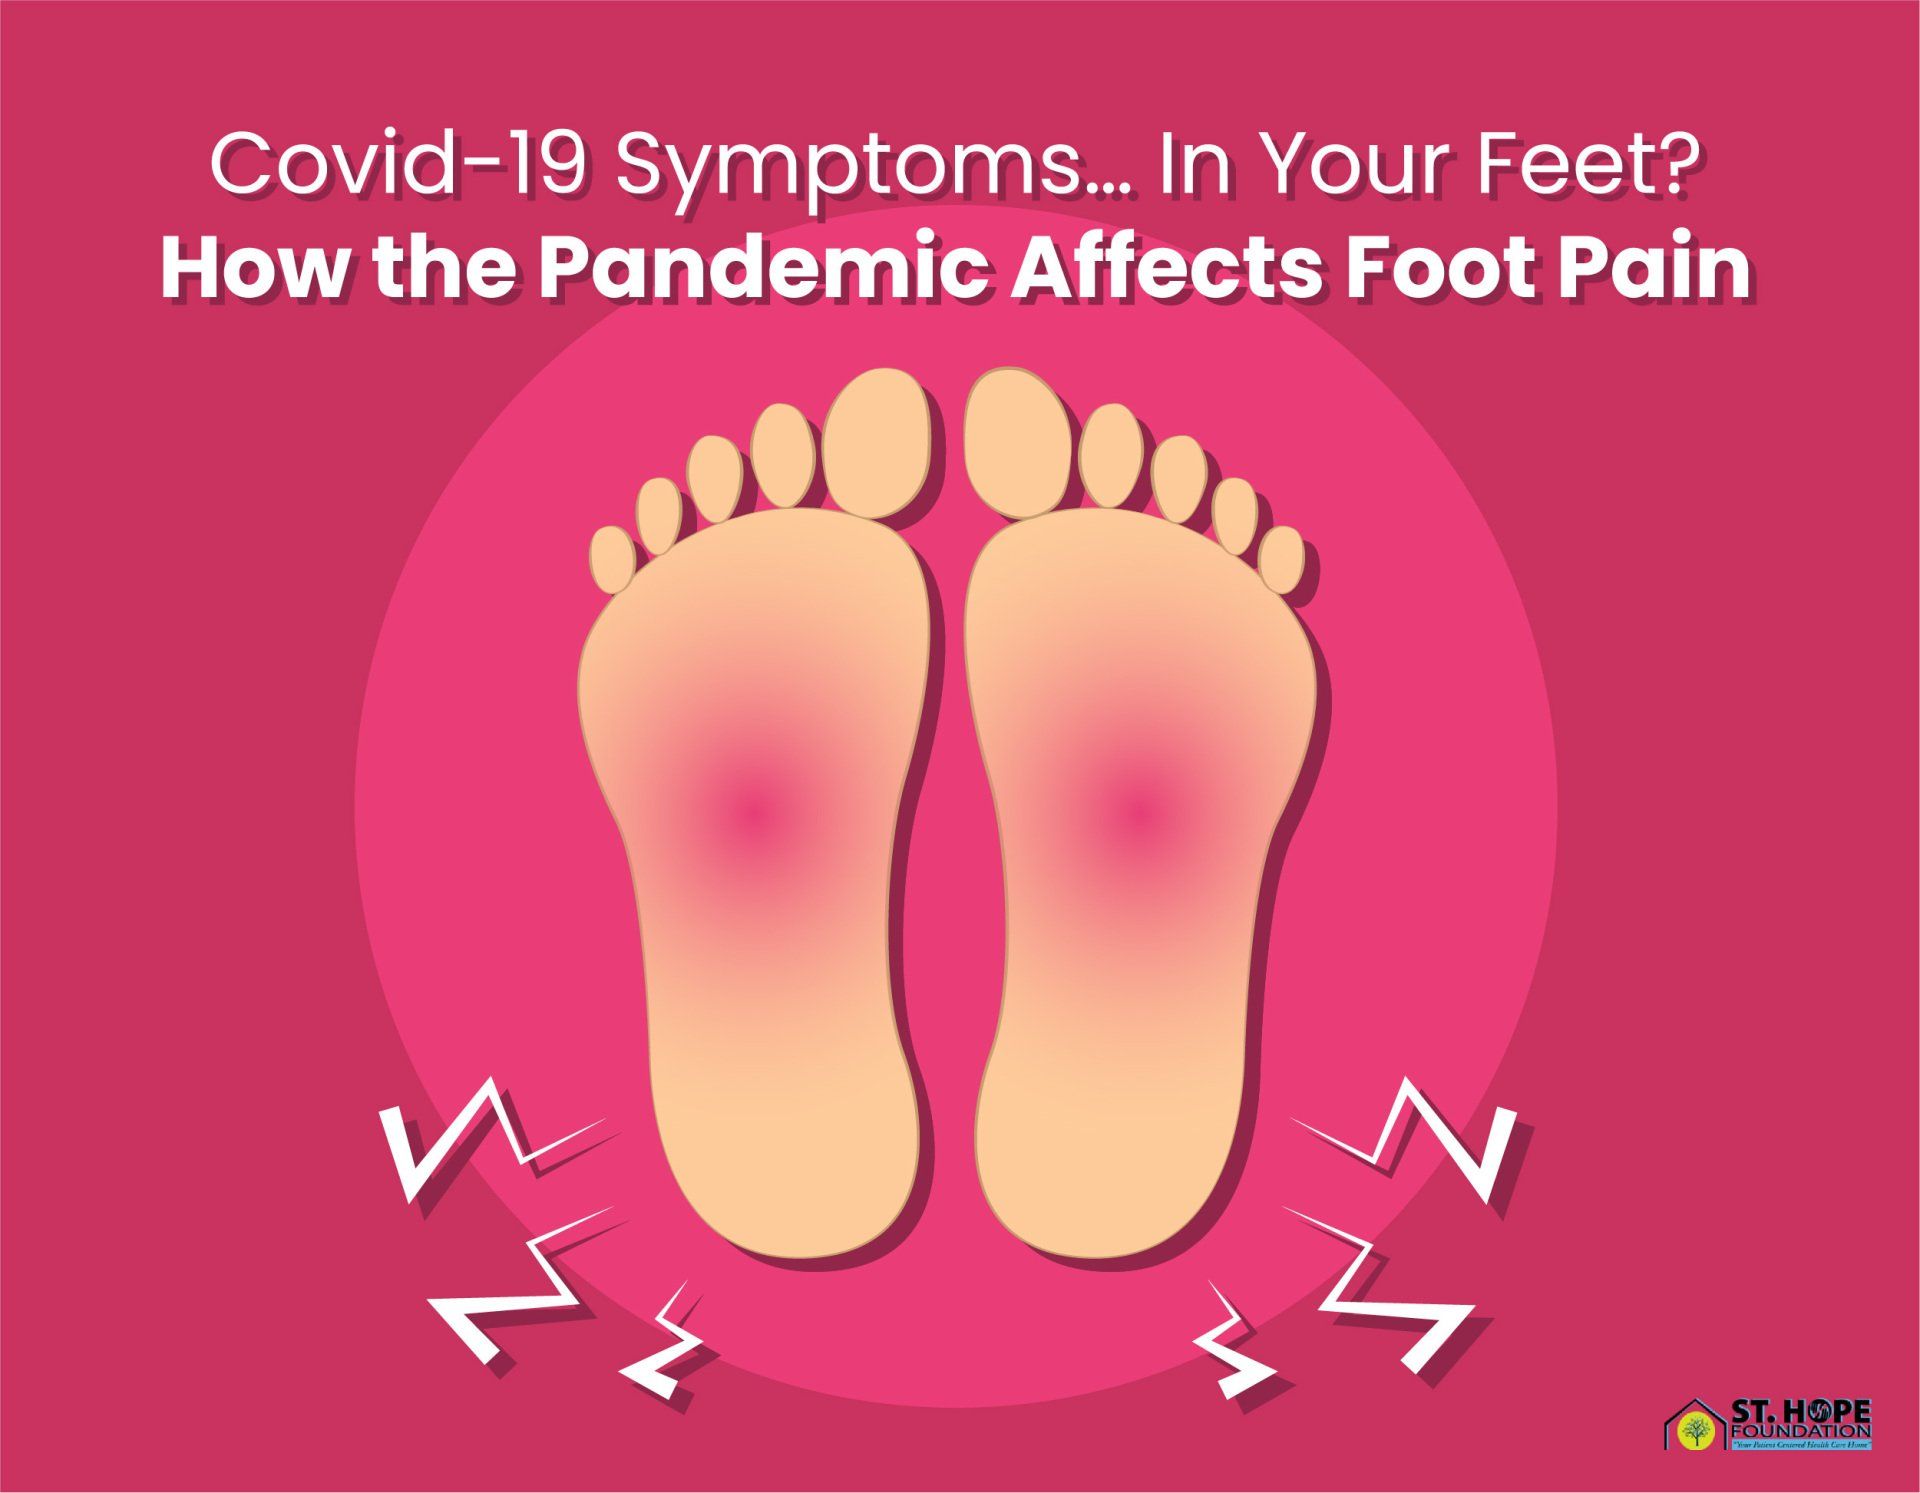 Why Do My Feet Hurt So Bad? 13 Causes and How to Stop the Pain